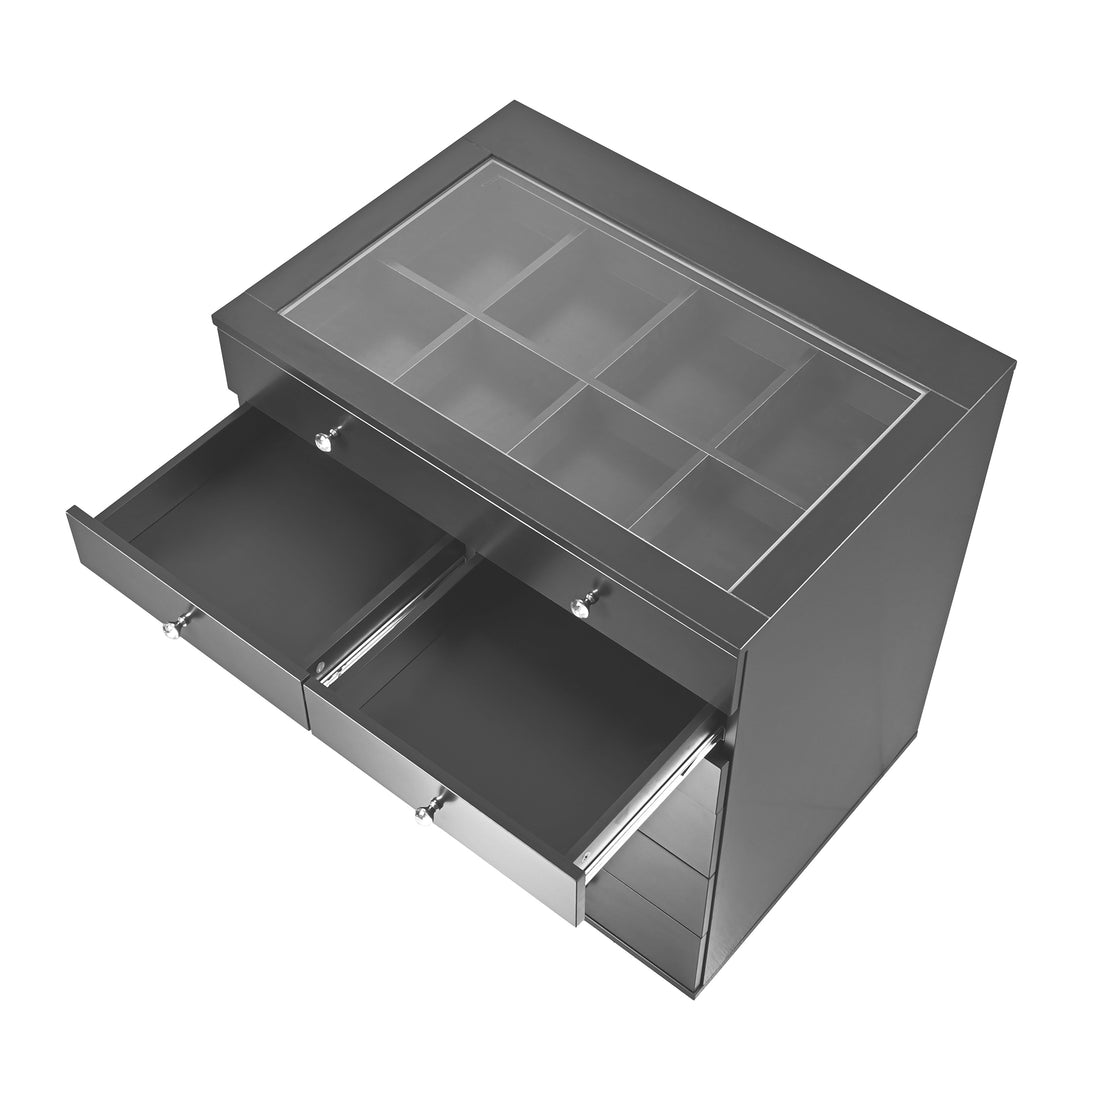 SlayStation® Display Chest with Drawers